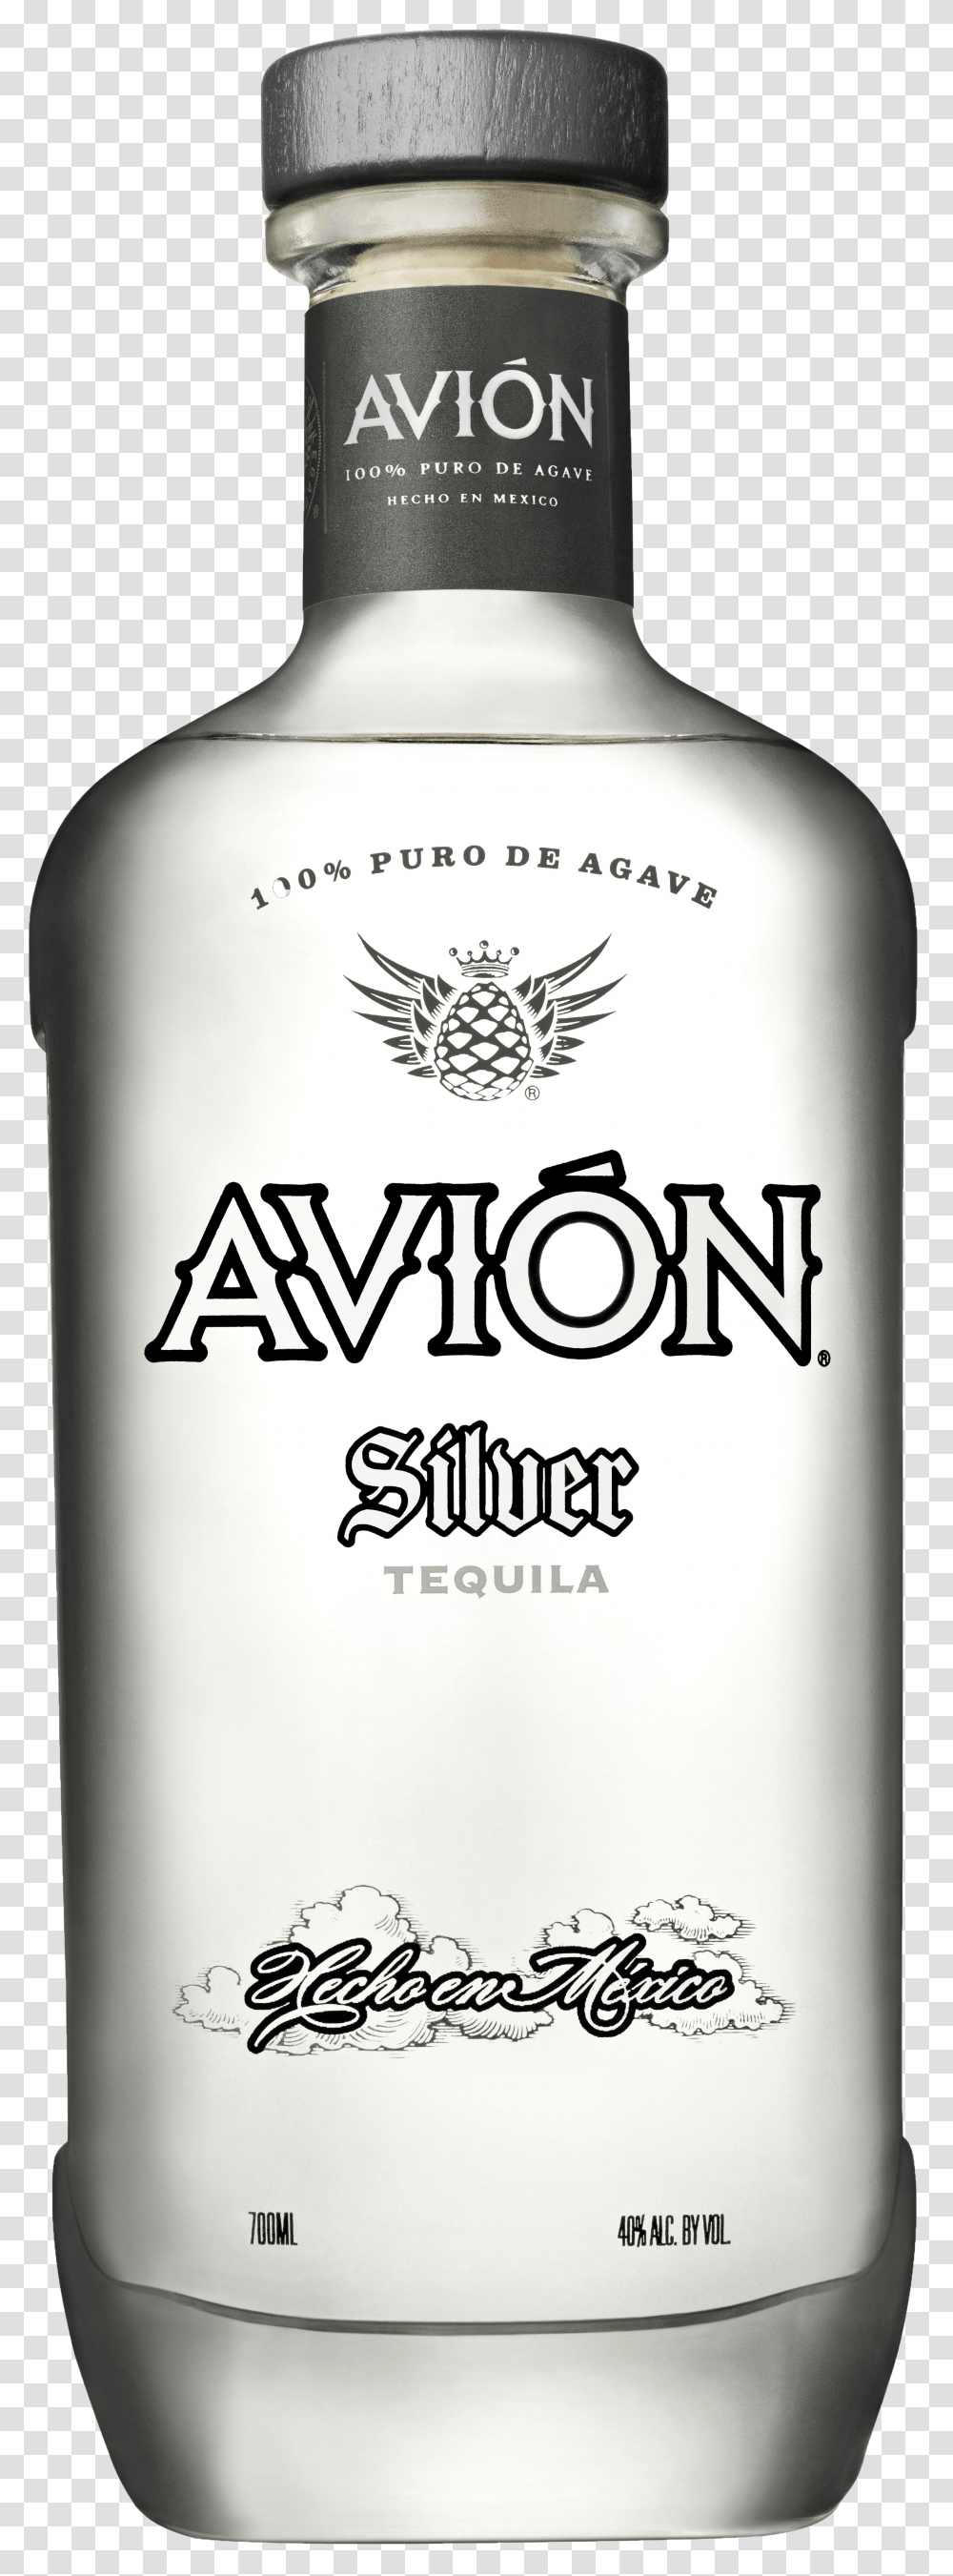 Avion Tequila Mexico Silver 375ml Bottle Tequila Avion Blanco Transparent Png